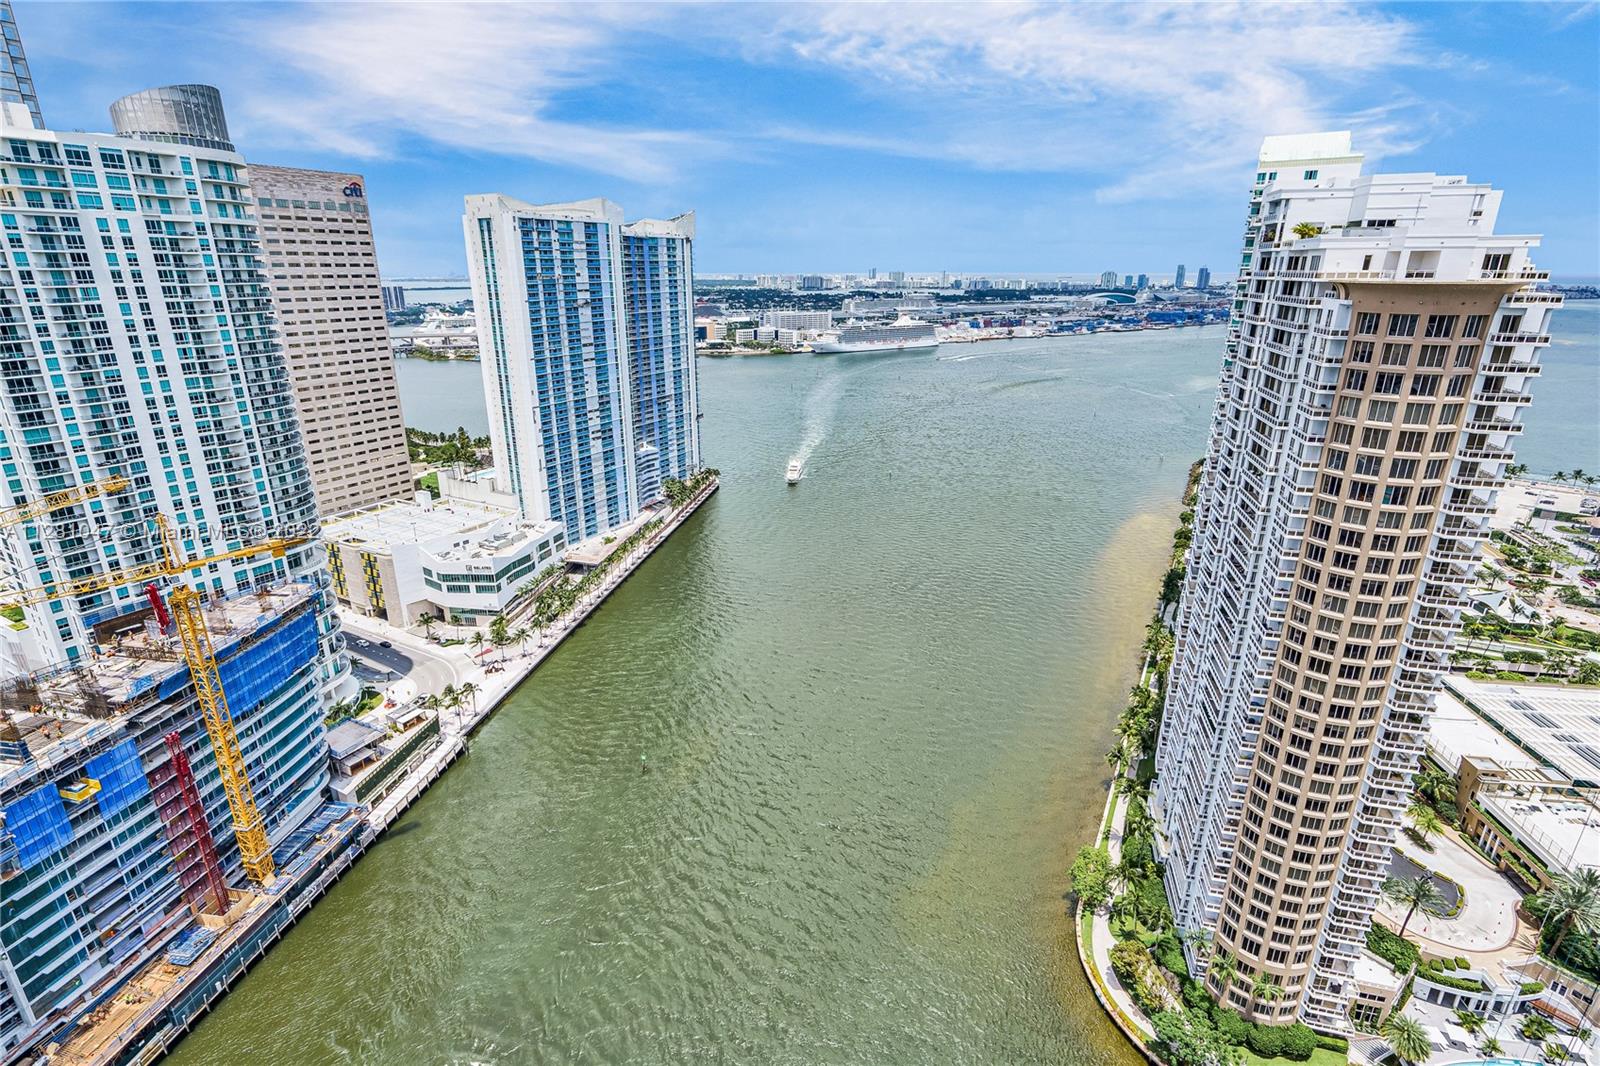 Spectacular bay & ocean views! Gorgeous fully furnished 2/2 unit in Tower I at Icon Brickell. Unit features white glass porcelain floors throughout. Open design with Italian style cabinets, Sub-Zero refrigerator, Bosch dishwasher, Wolf glass cook top, washer & dryer. All amenities of a 5-star hotel and award winning SPA, fitness center, theater, security and more. Unit comes with one assigned parking space. Internet & basic cable included. Icon is centrally located close to the beach and just steps away from Brickell City Center, restaurants and bars.